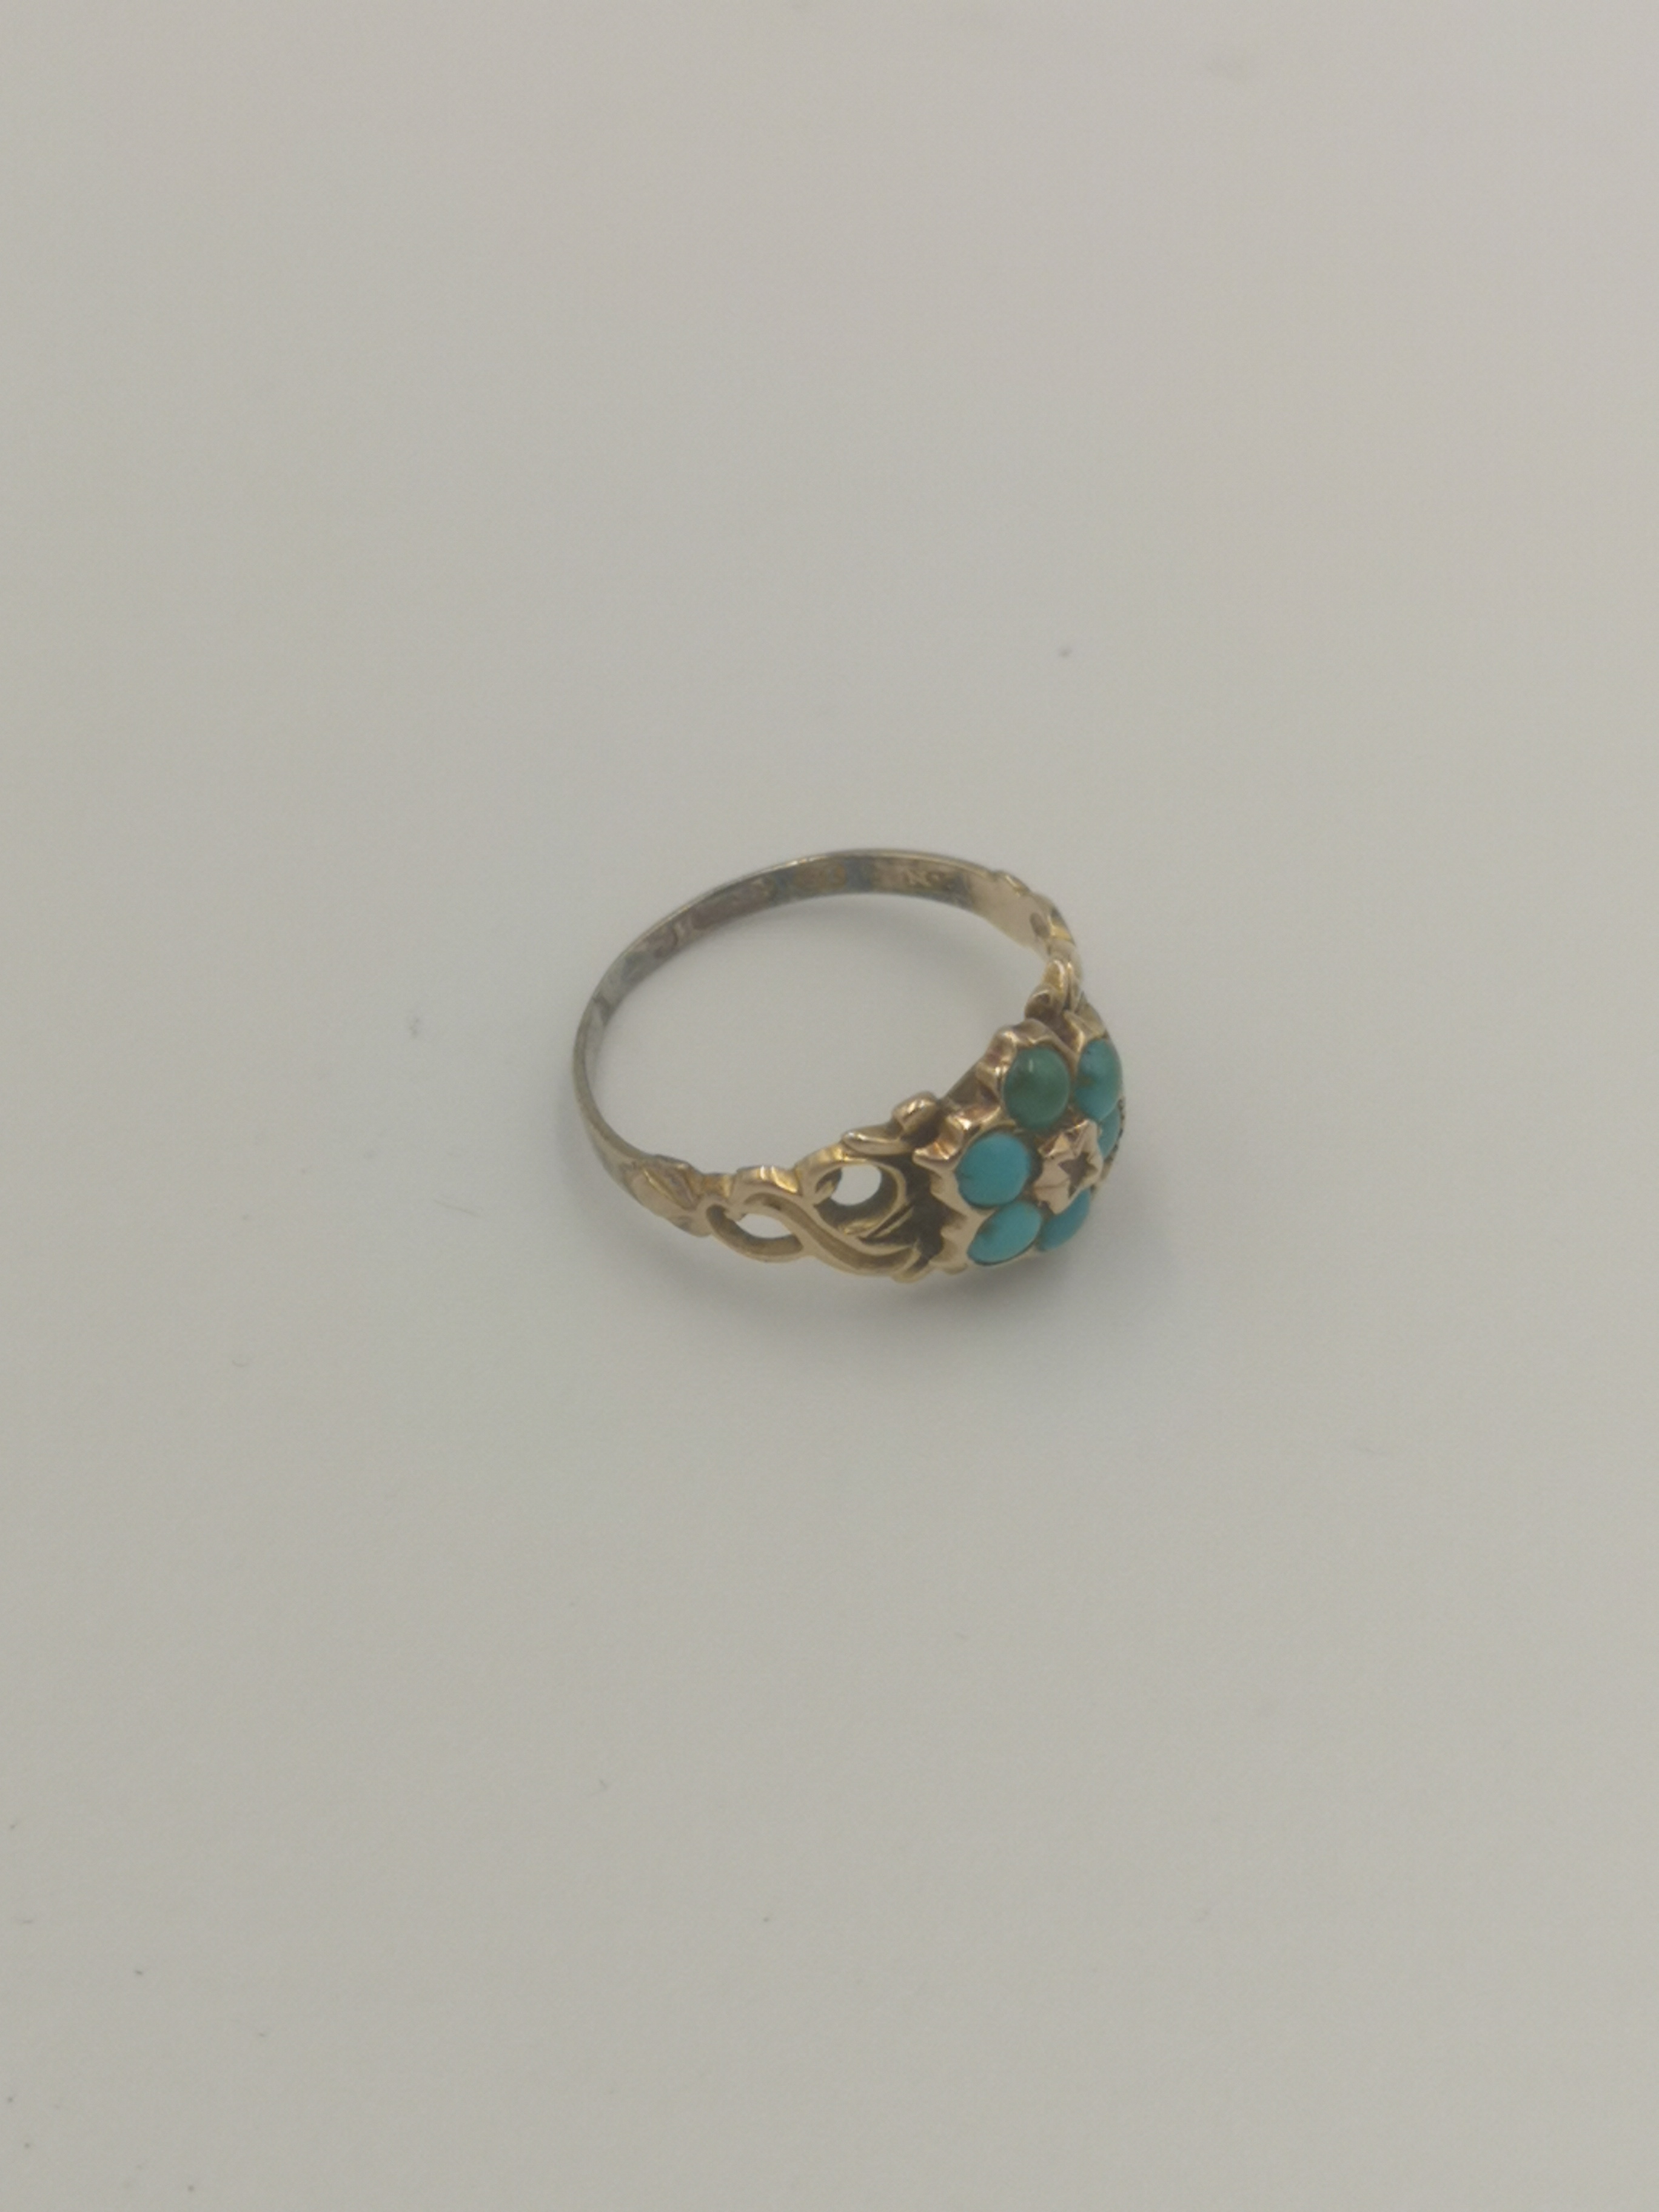 15ct gold ring set with turquoise - Image 4 of 5